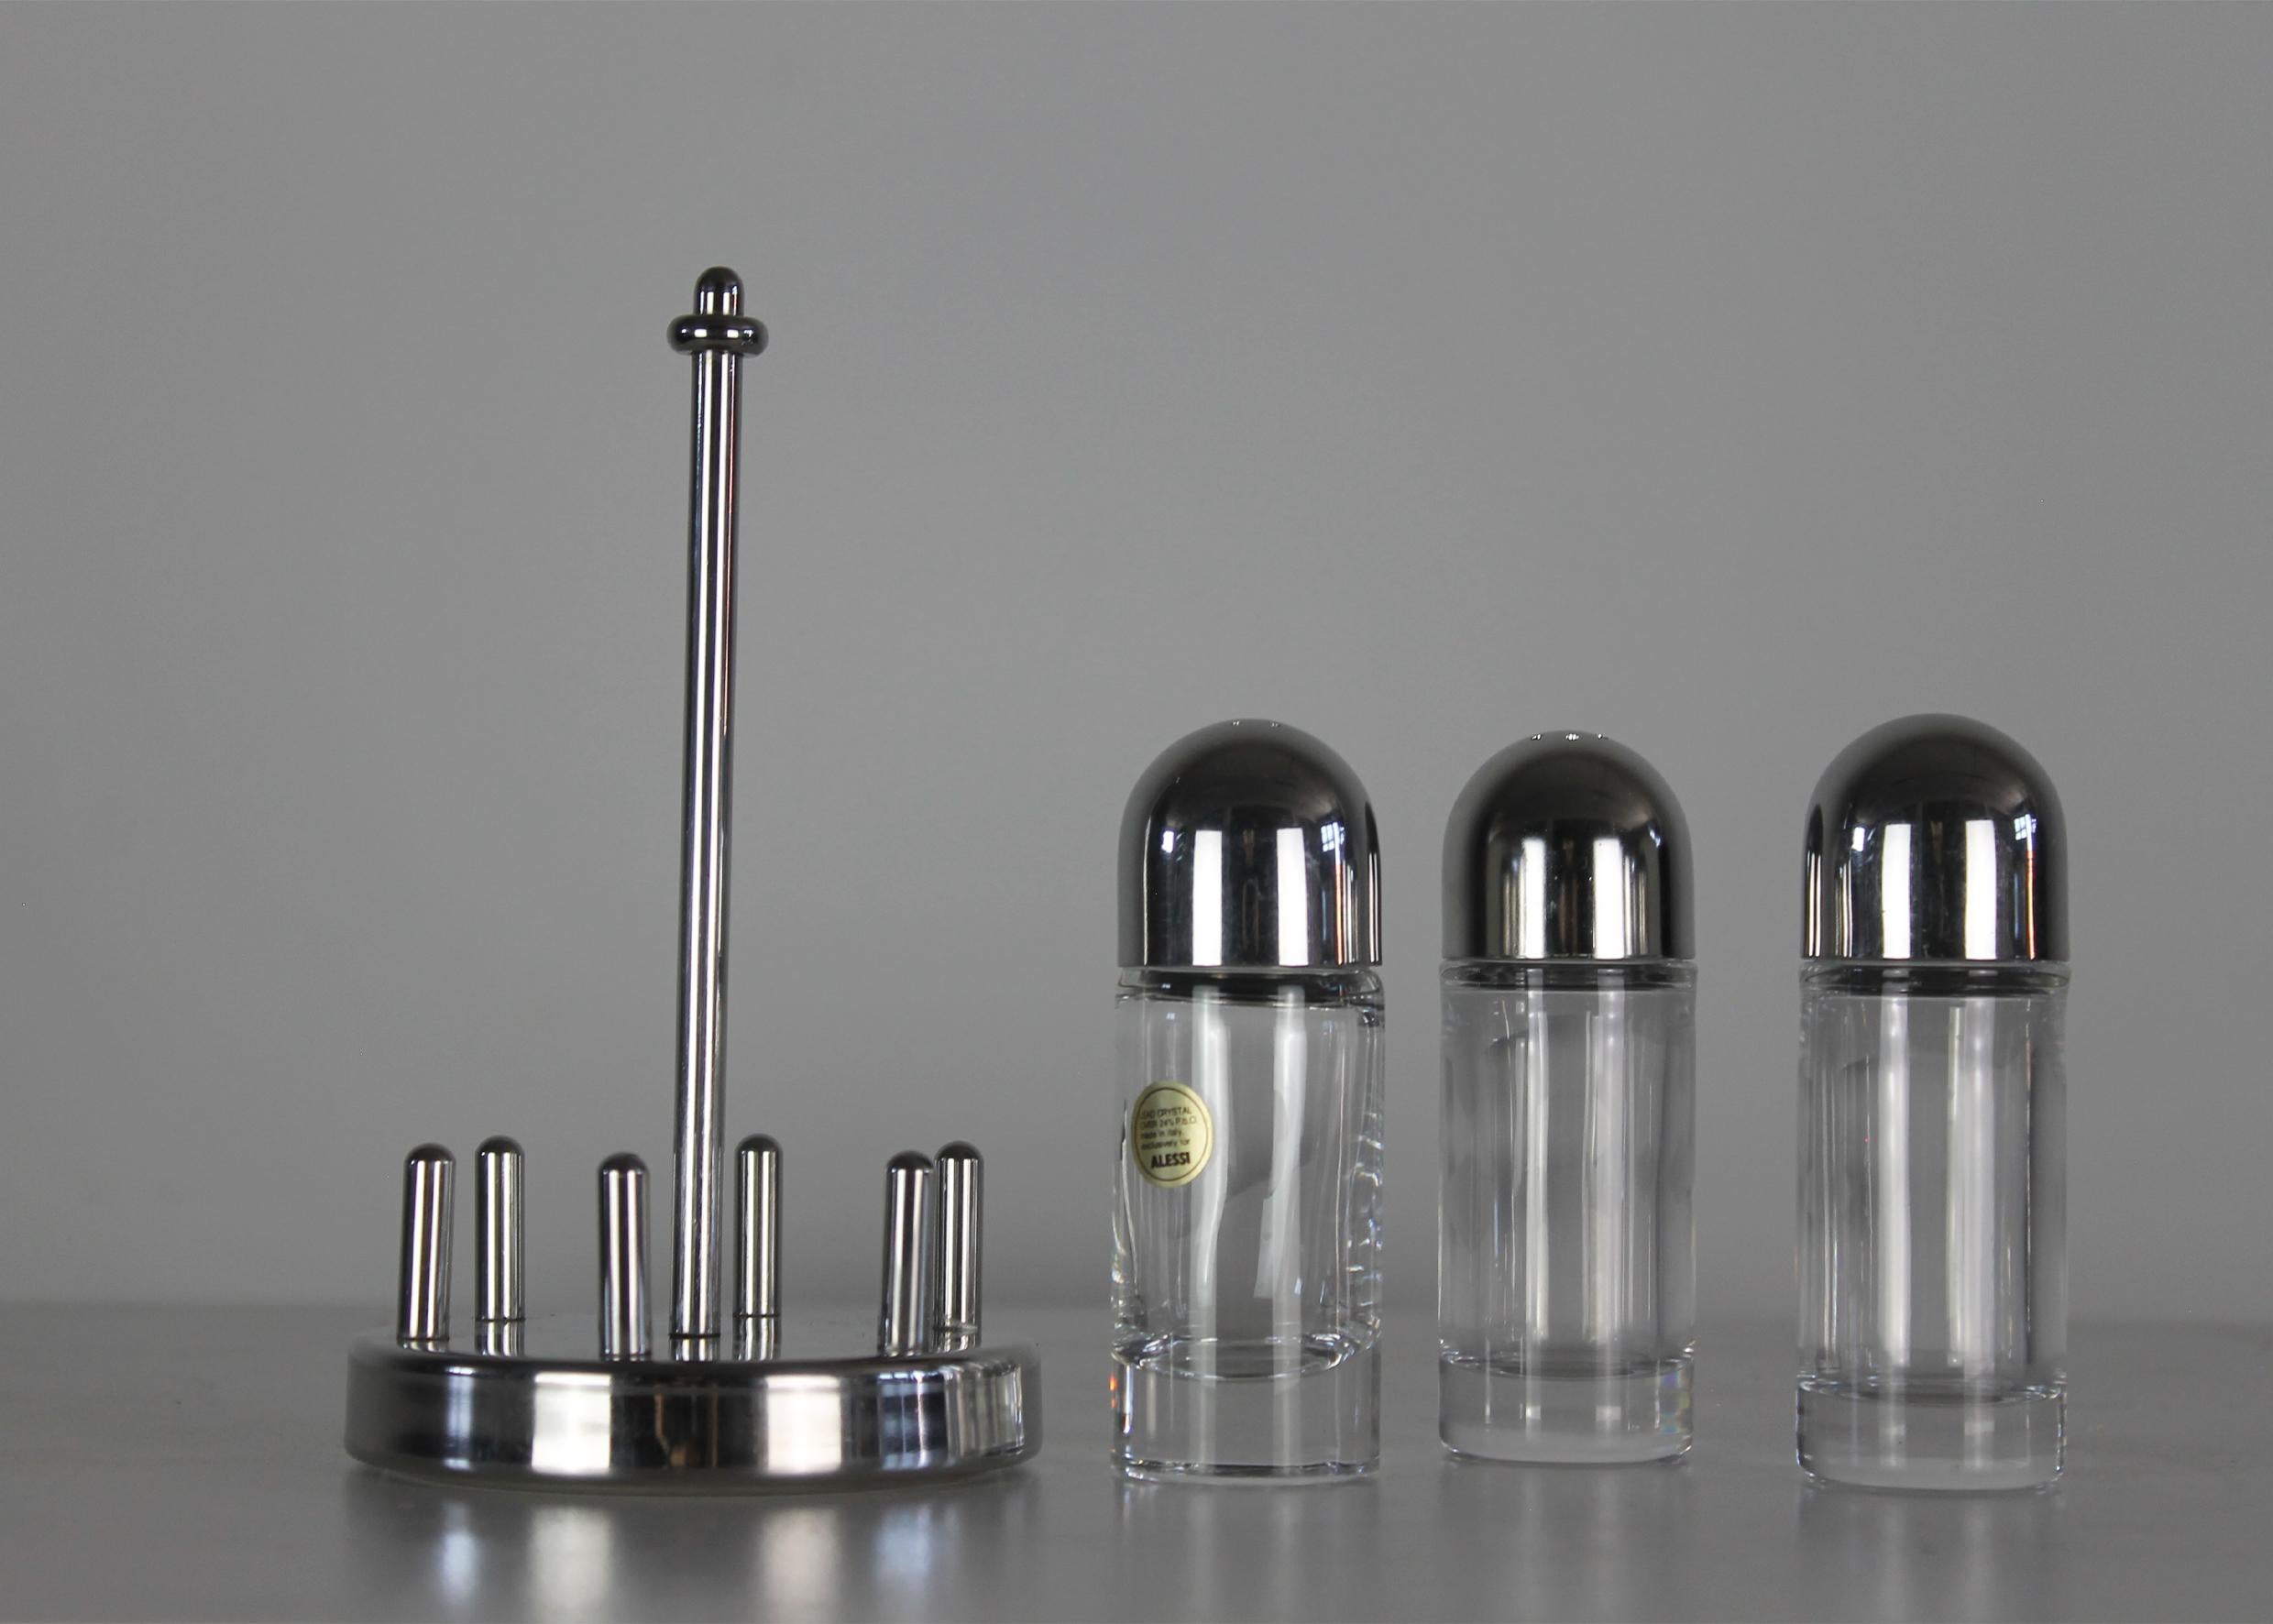 Late 20th Century Ettore Sottsass Cruet Set in Stainless Steel and Glass by Alessi 1978 Italy